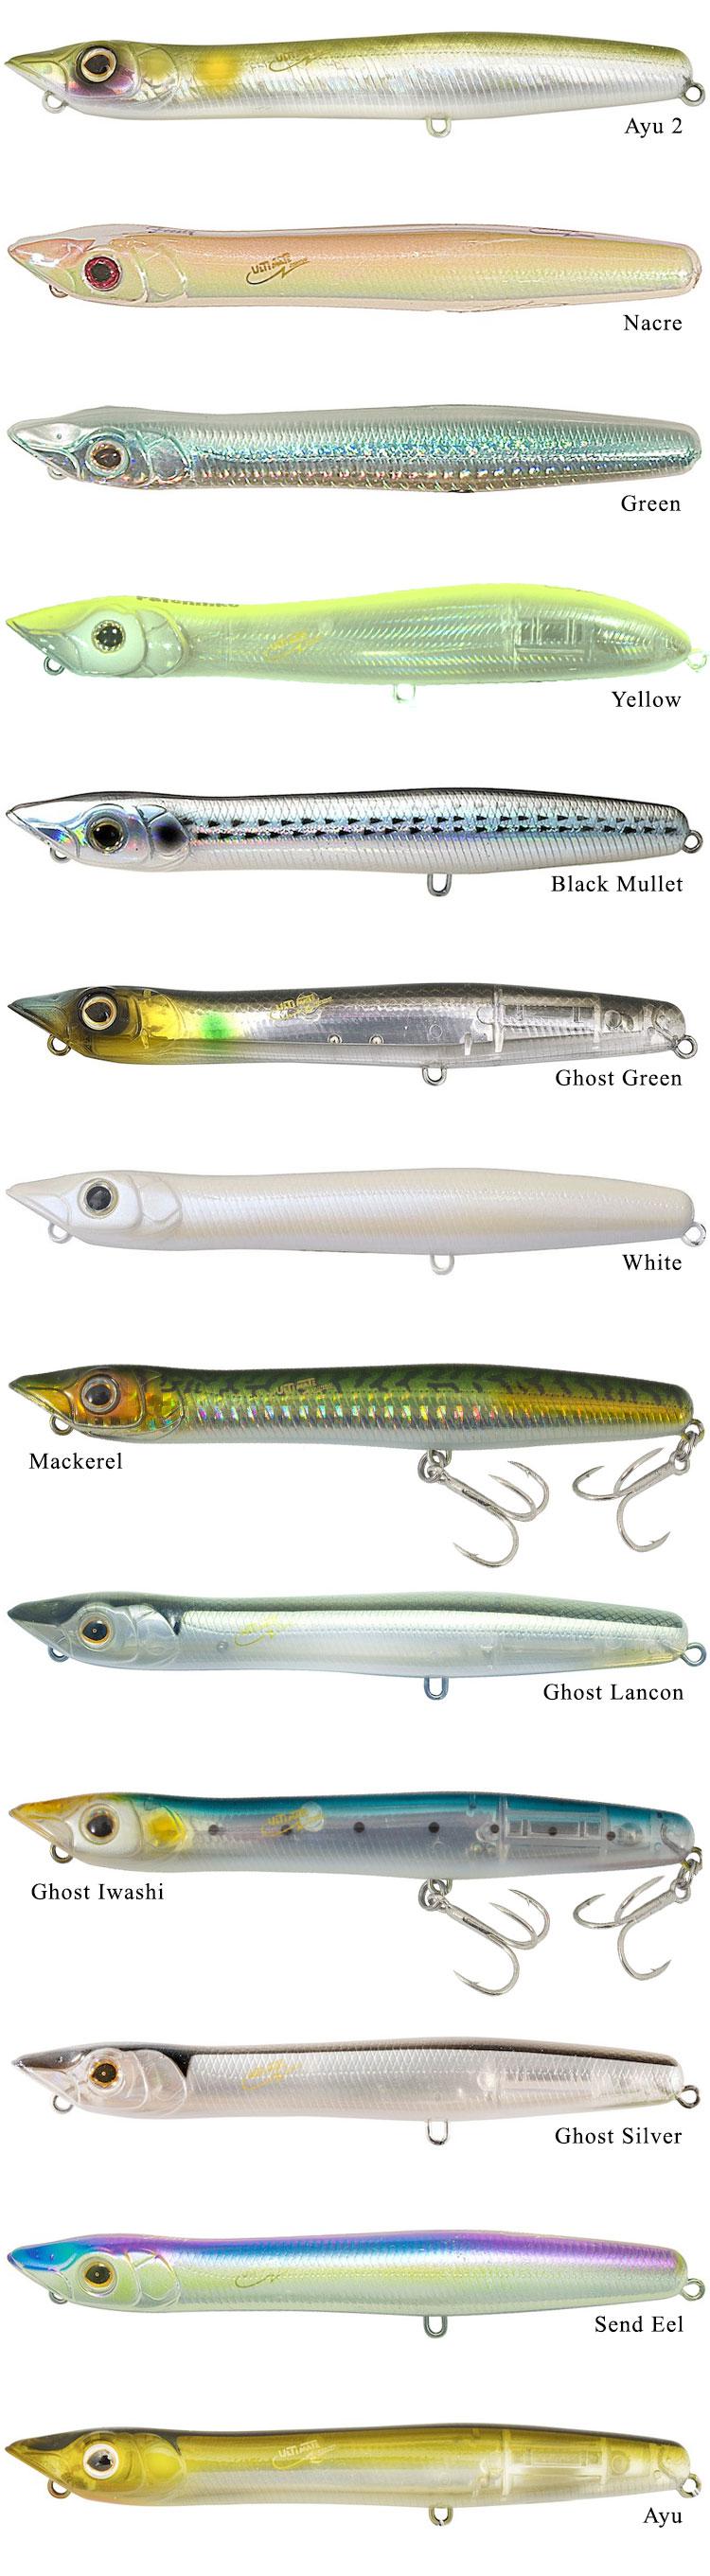 color GHOST SILVER ULTIMATE SEABASS LURE By XORUS FROSTY II 